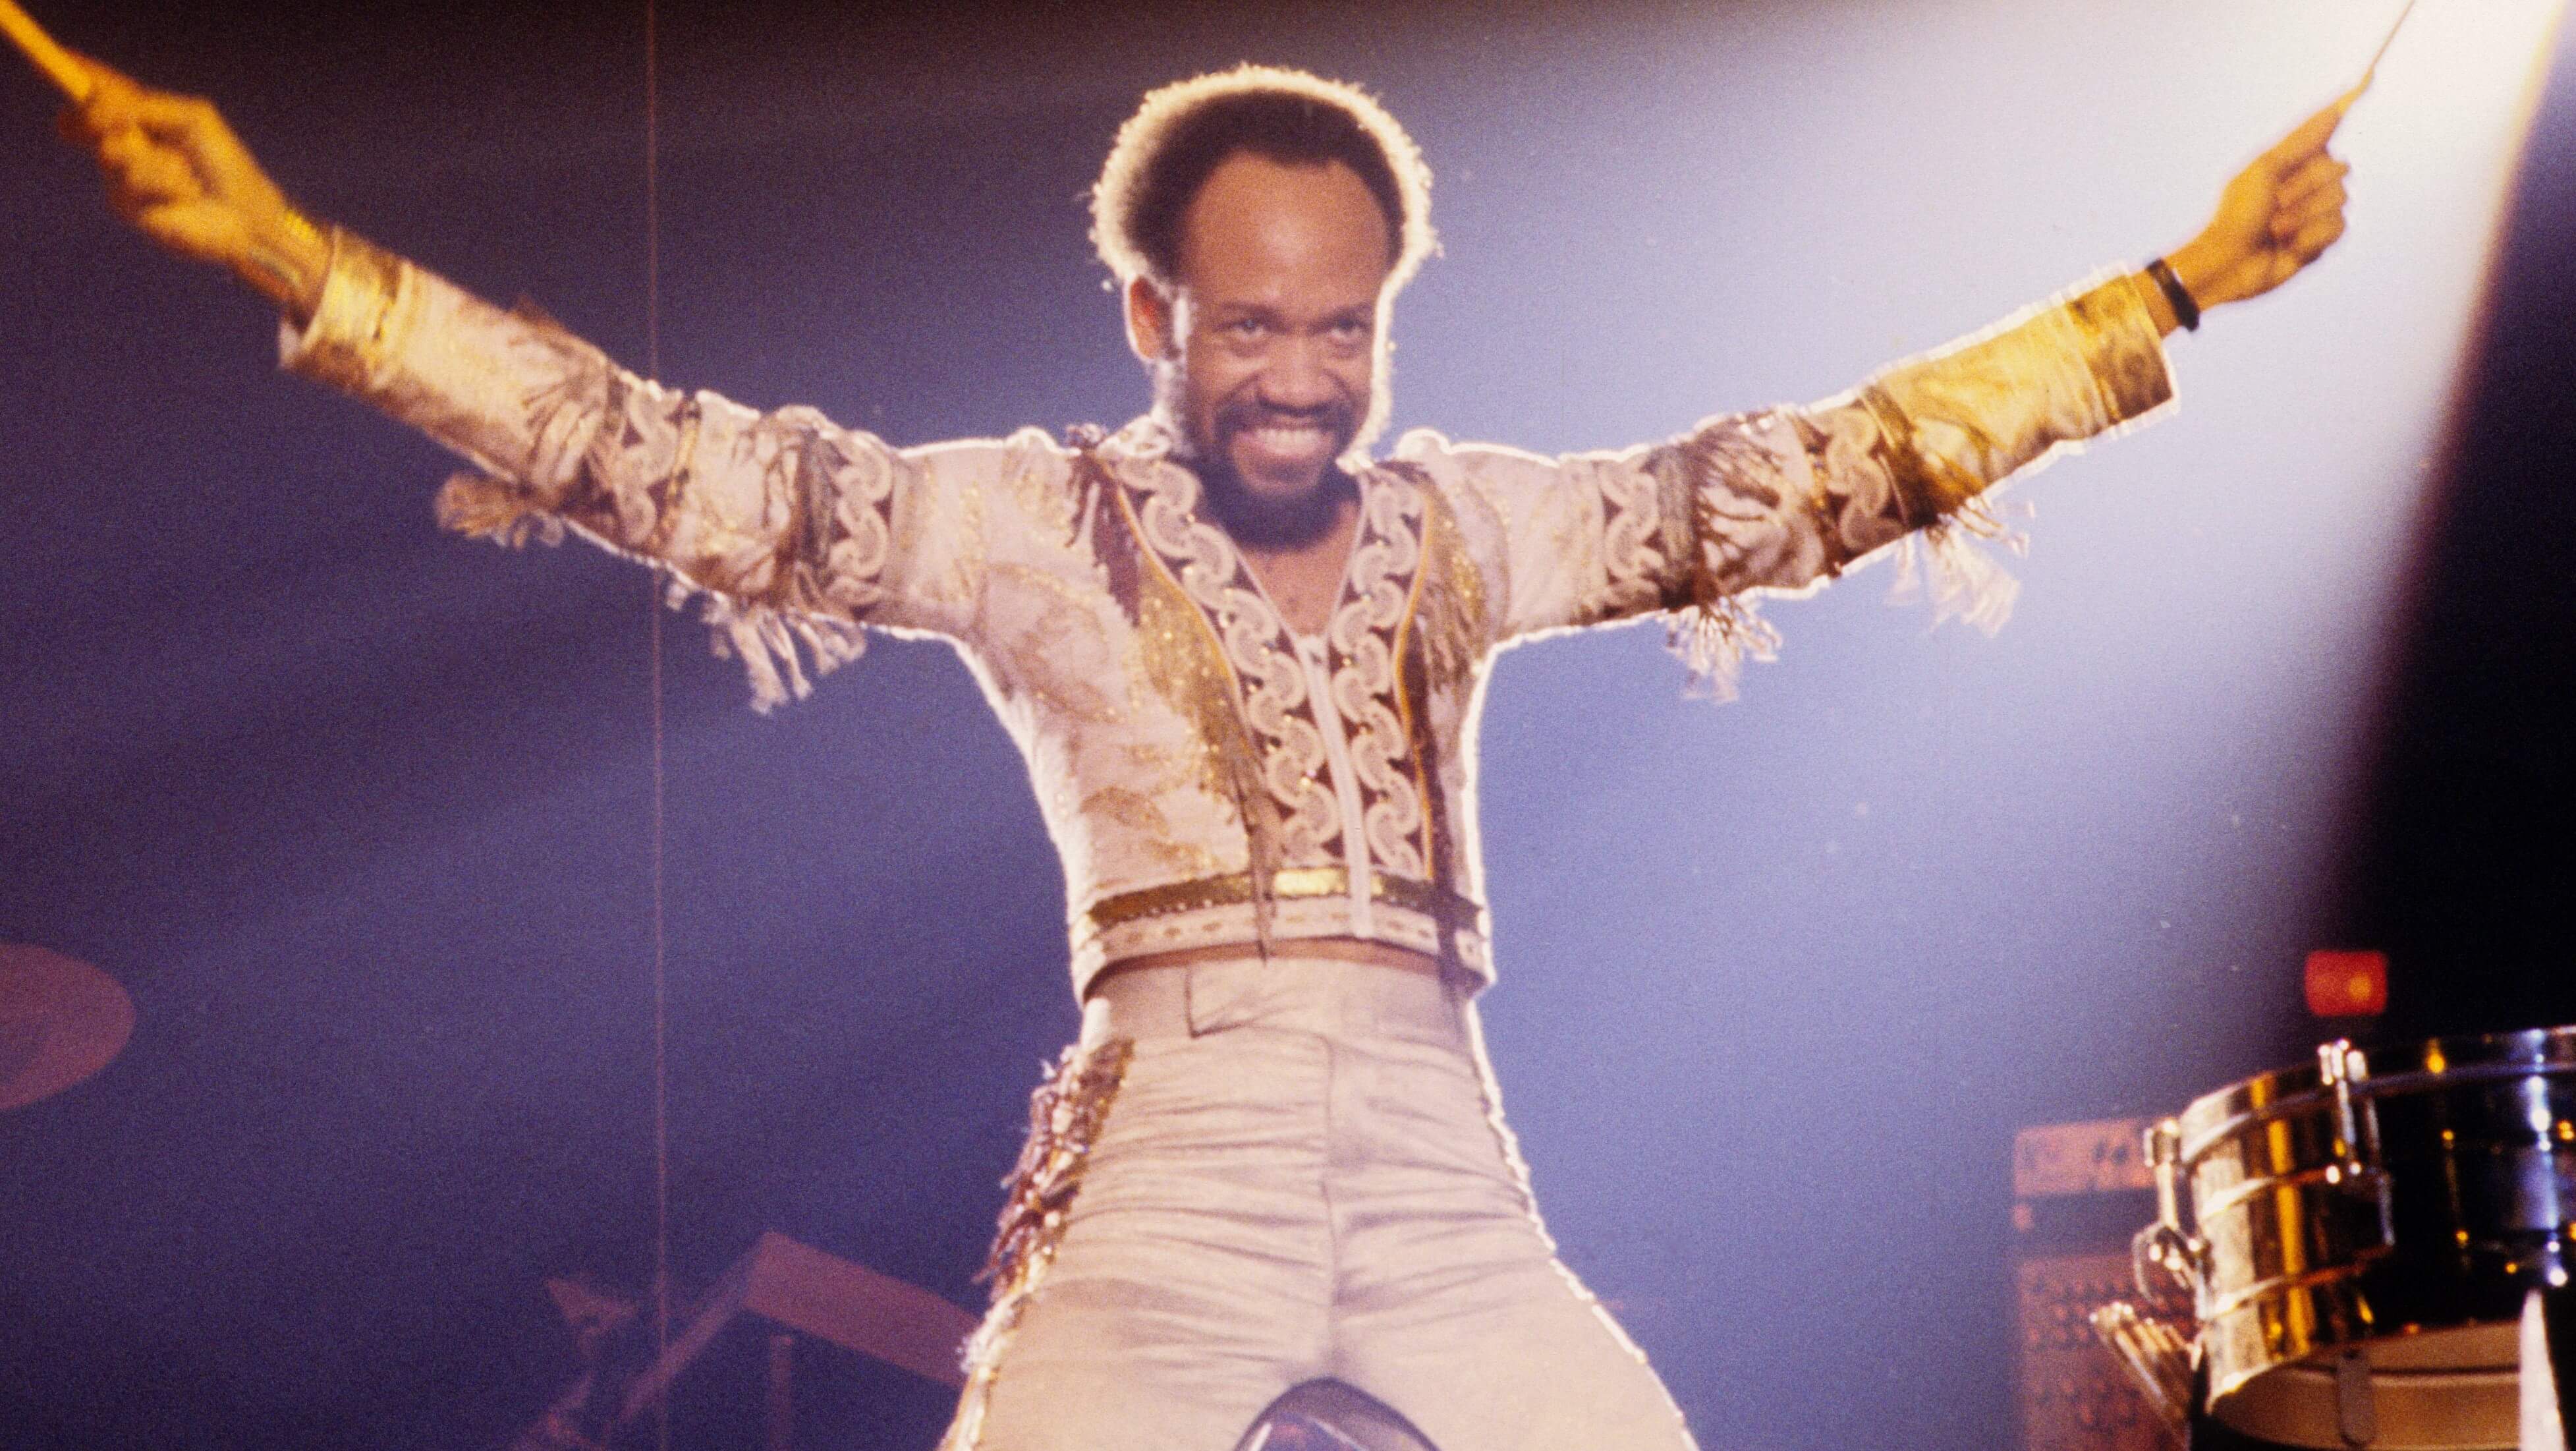 Earth, Wind & Fire's Maurice White wearing white